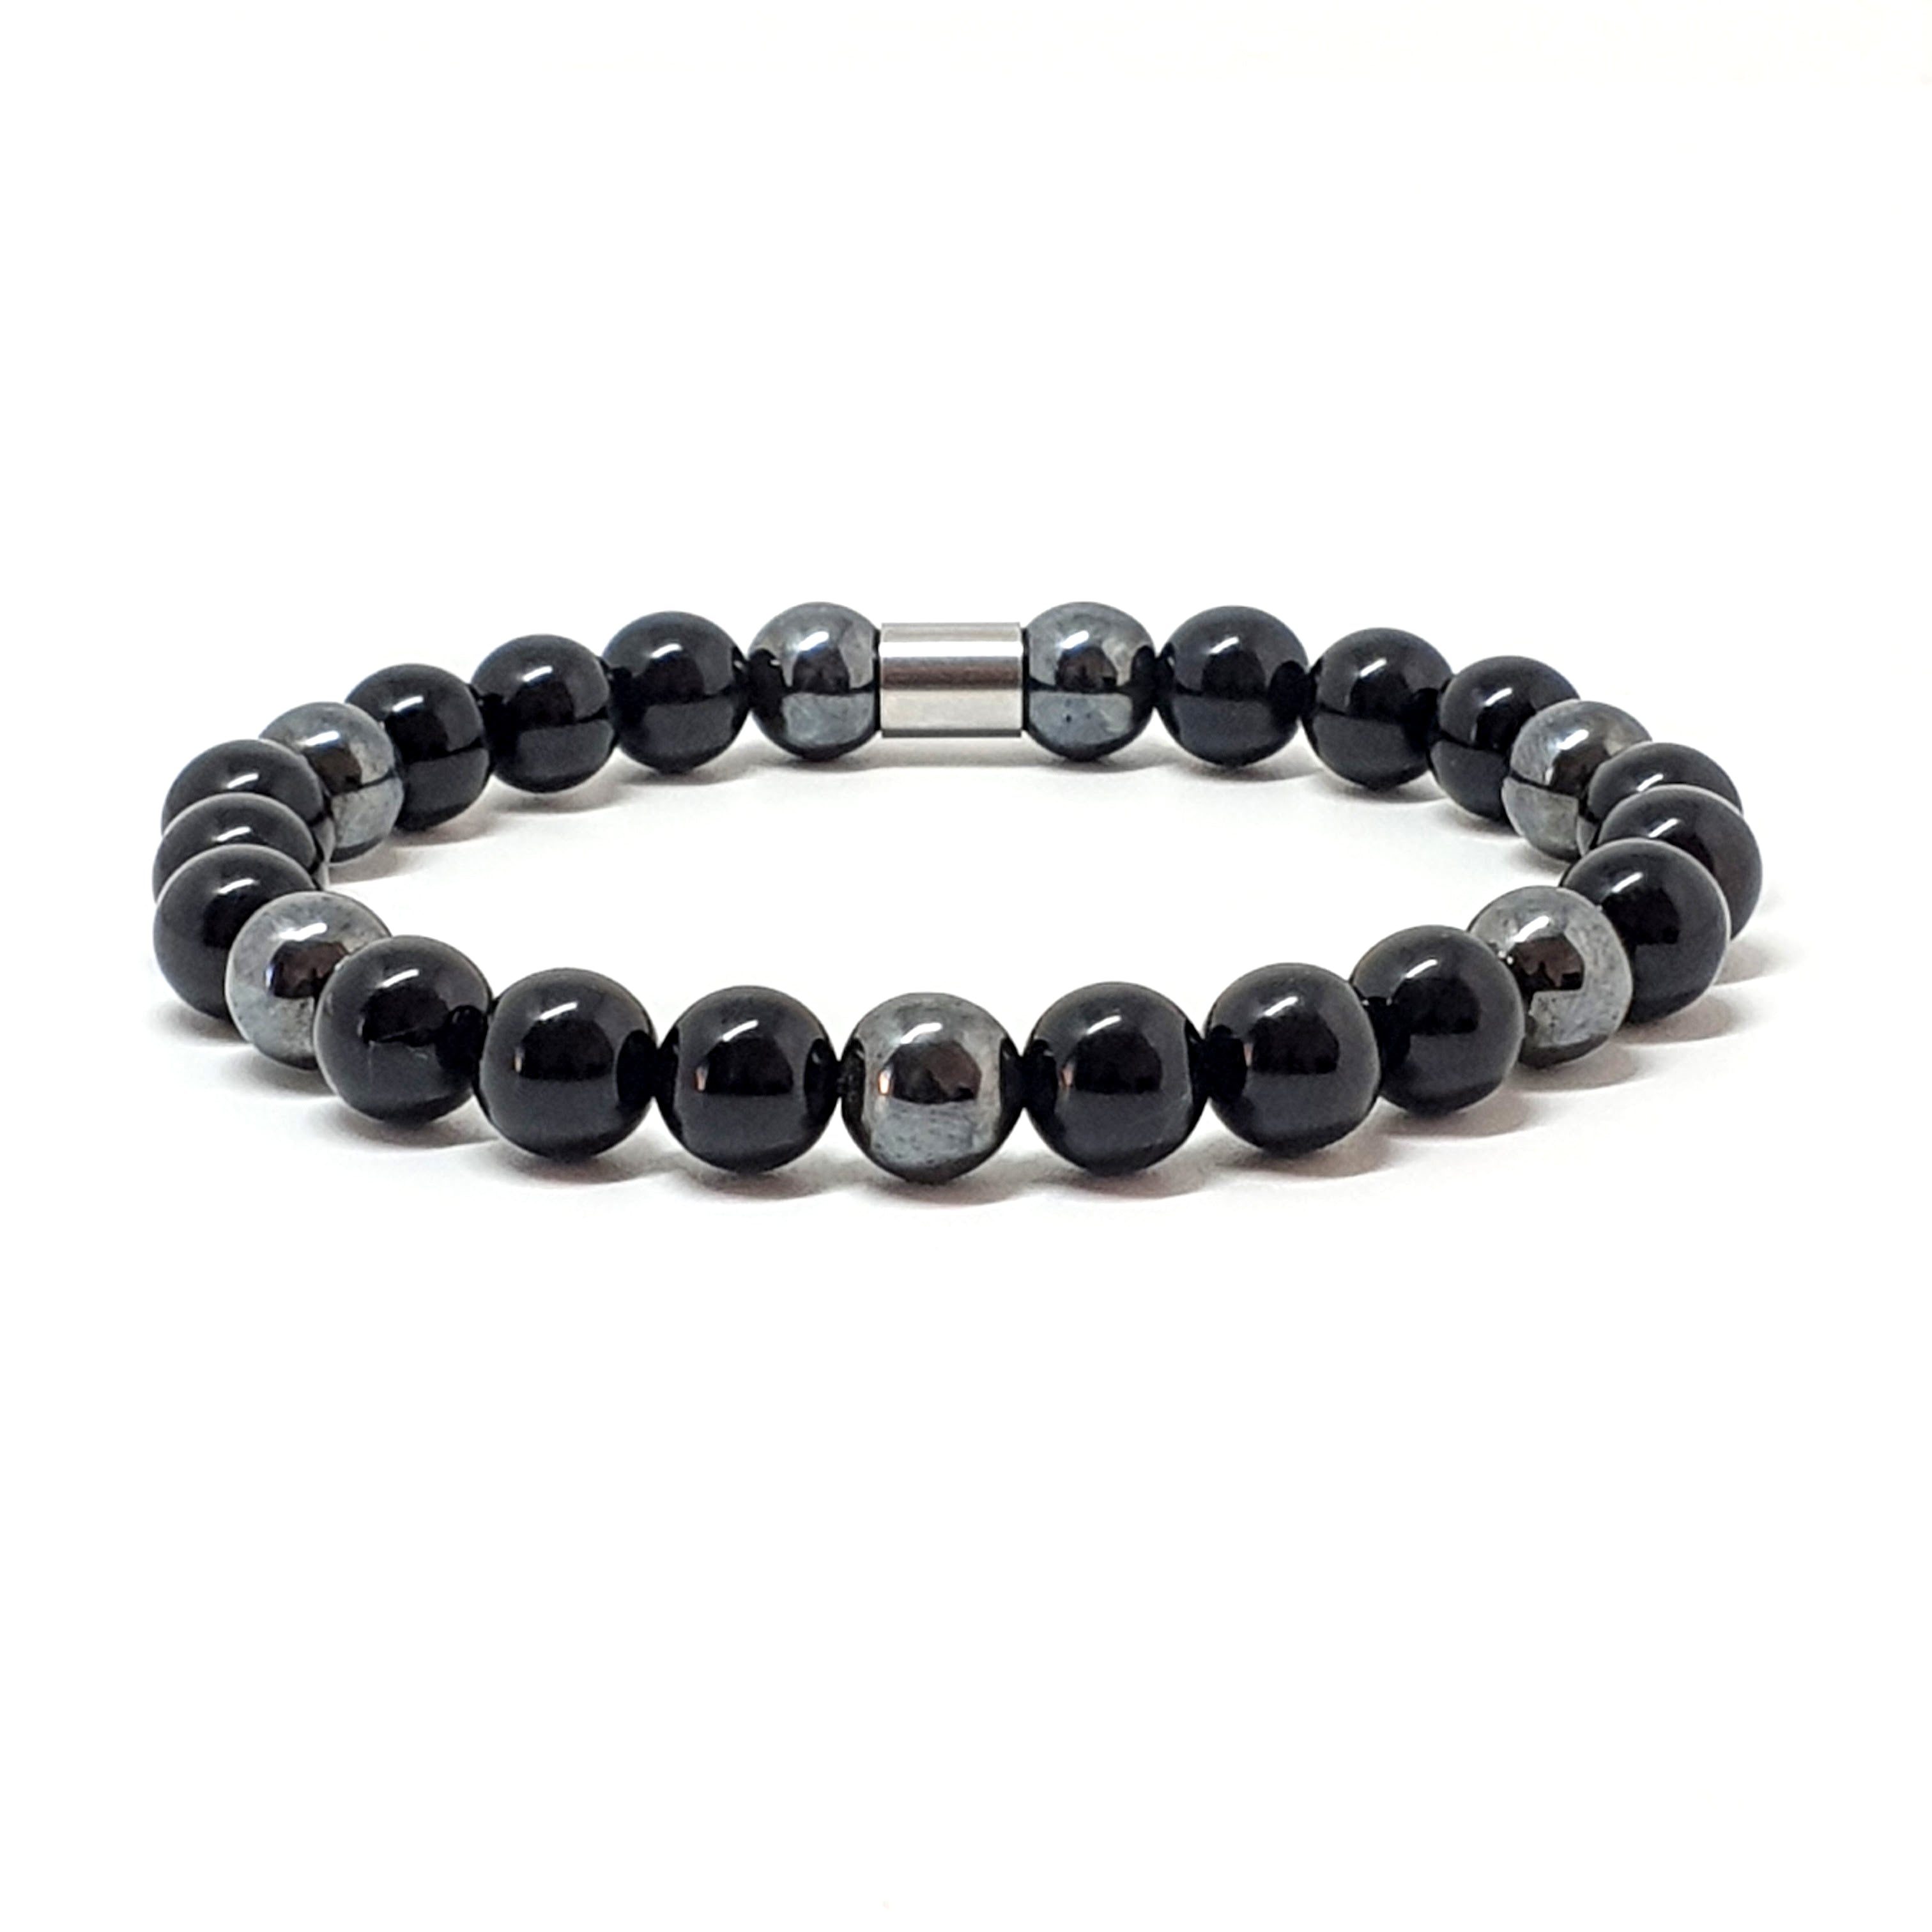 An onyx and hematite gemstone bracelet with stainless steel column bead